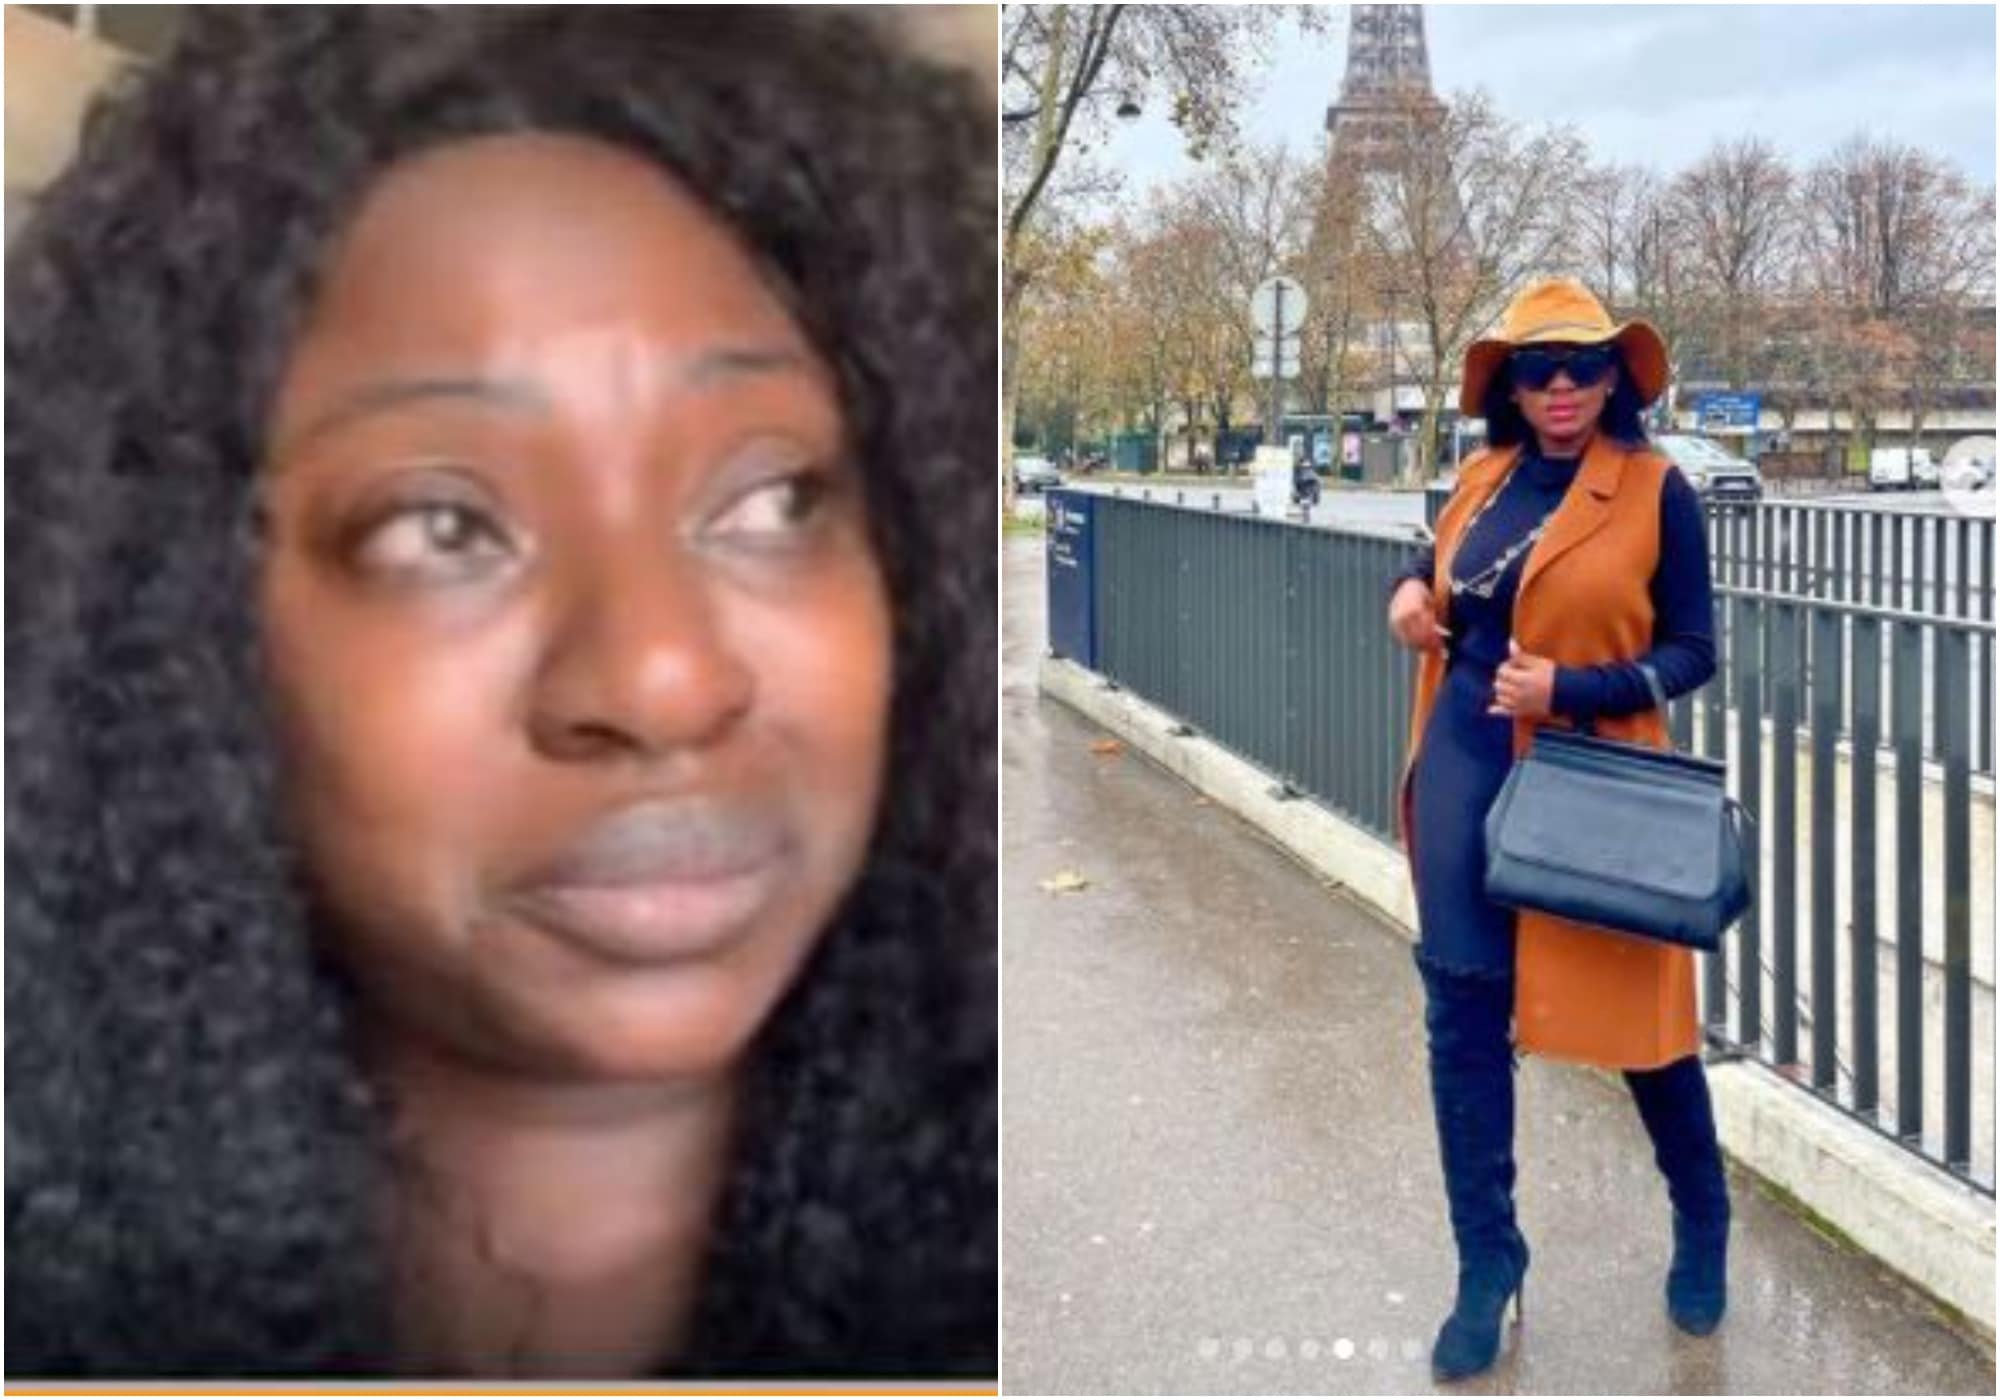 Yvonne Jegede shares moments from her vacation amidst losing her passport